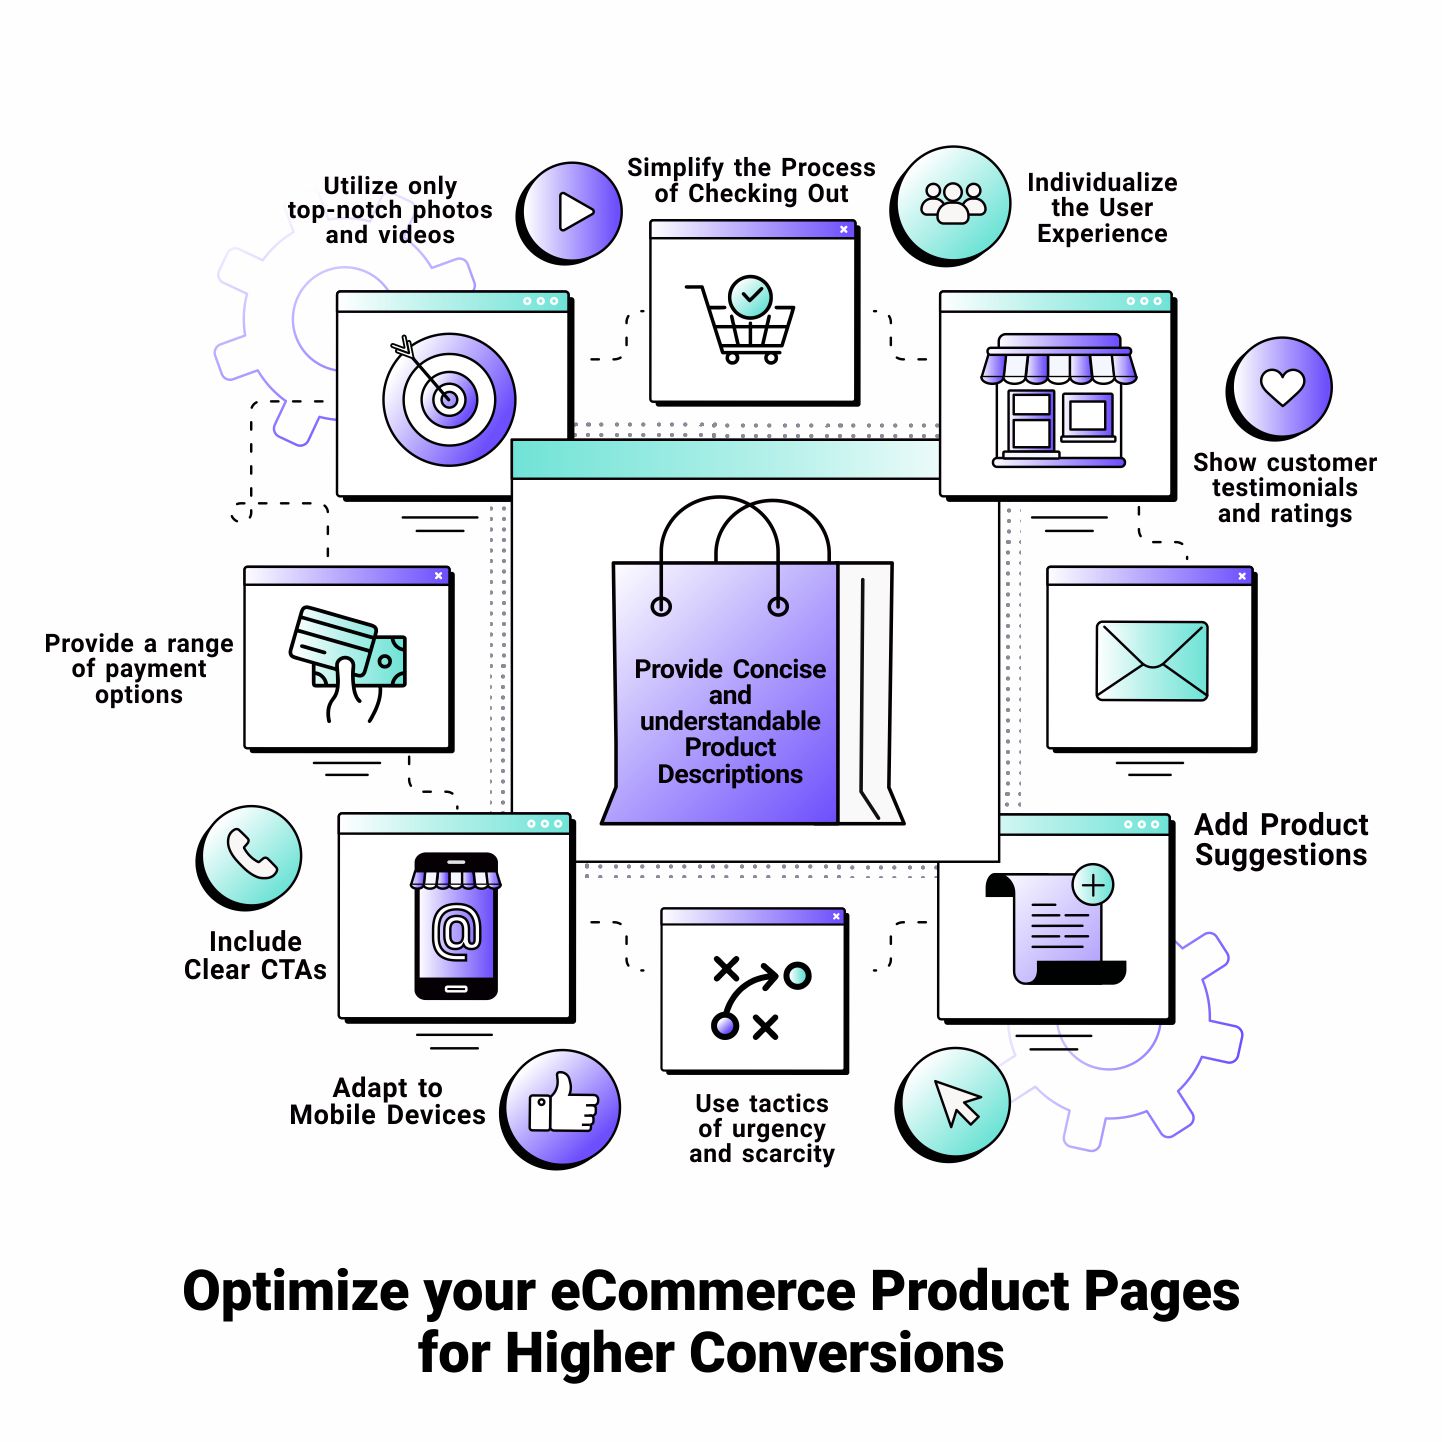 How to Optimize your eCommerce Product Pages for Higher Conversions   